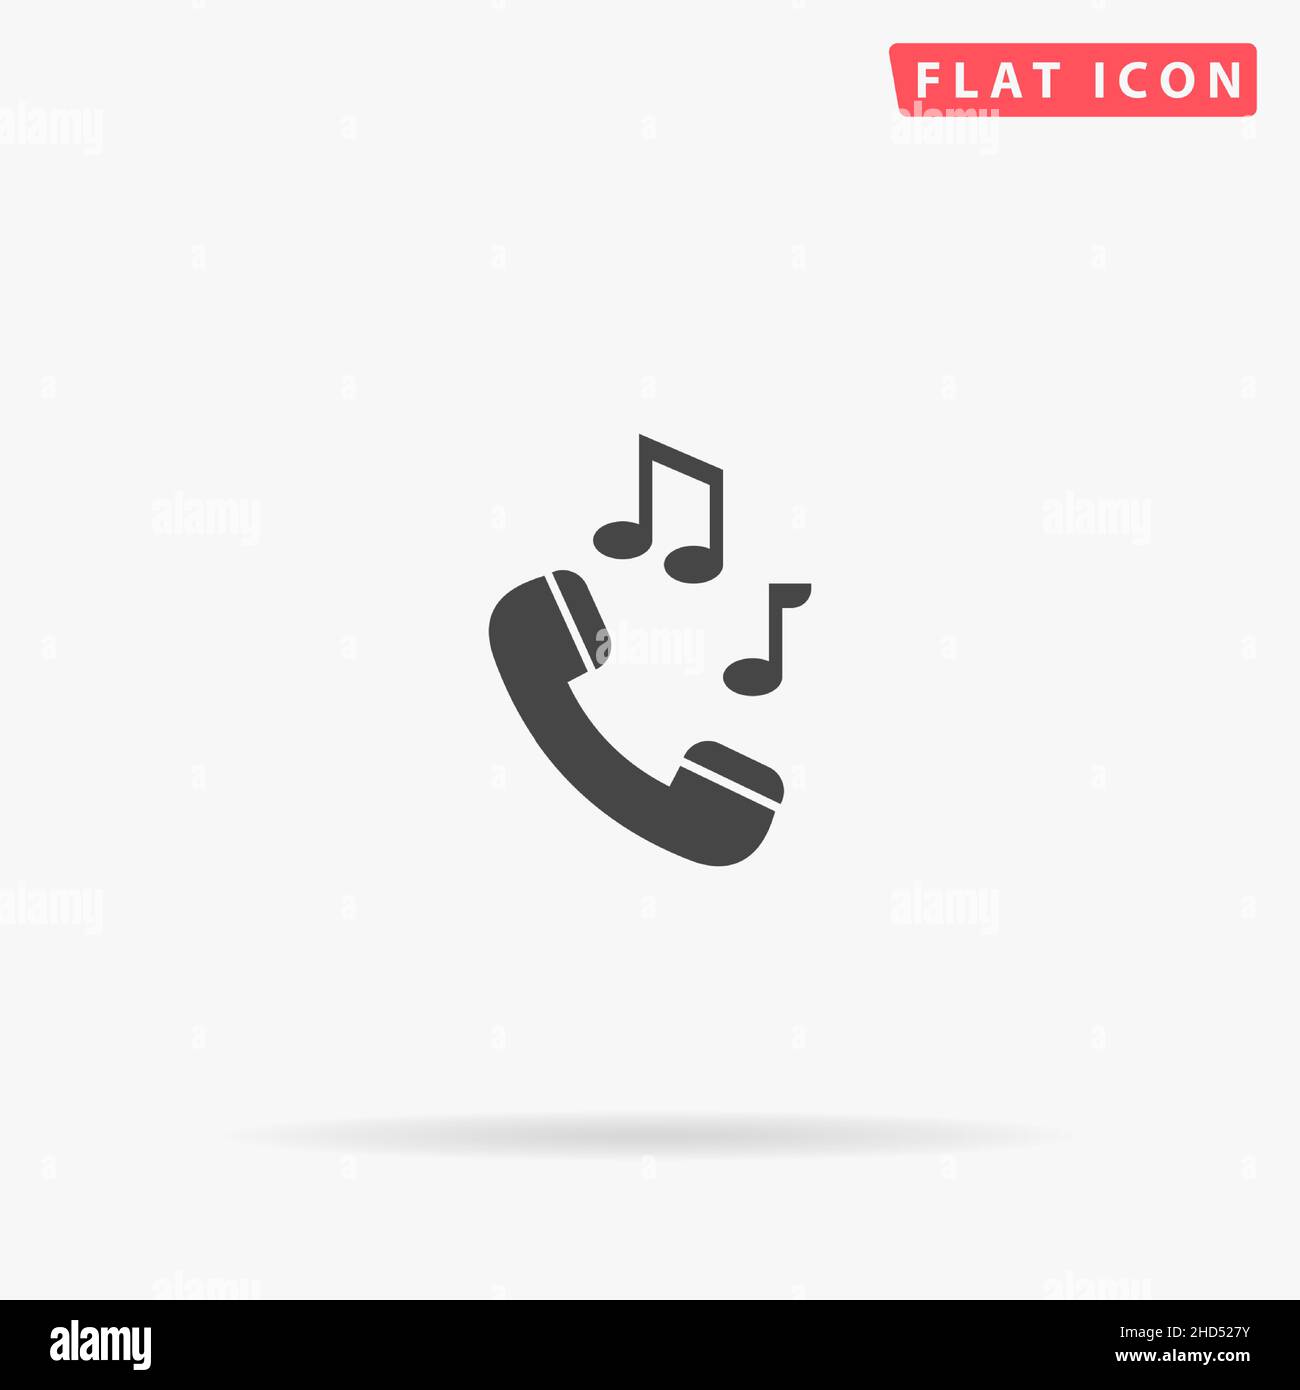 Call Waiting flat vector icon. Hand drawn style design illustrations. Stock Vector